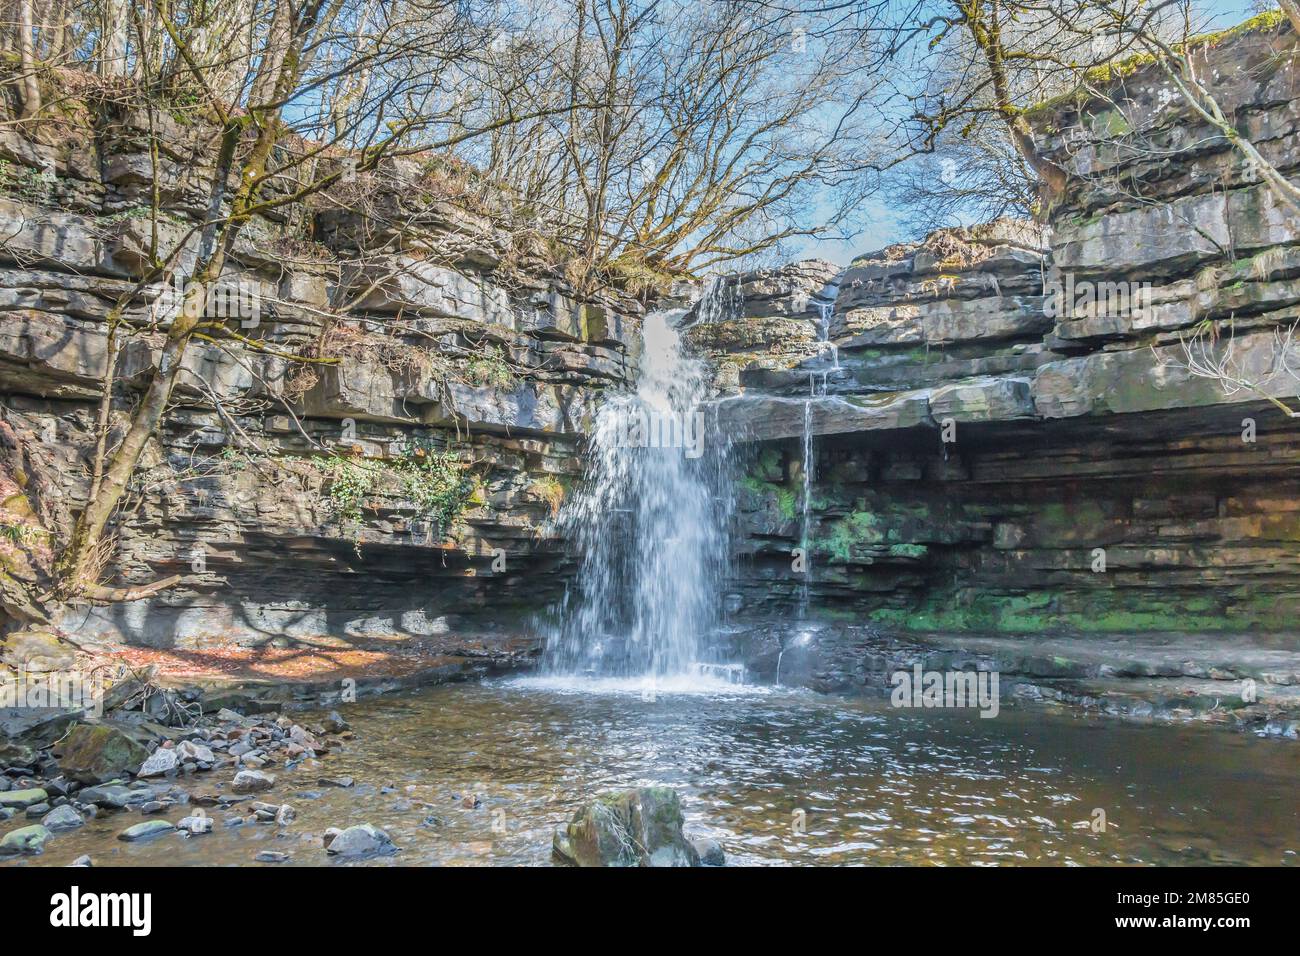 Summerhill Force waterfall on Bow Lee Beck, Upper Teesdale, within the North Pennines AONB. Stock Photo